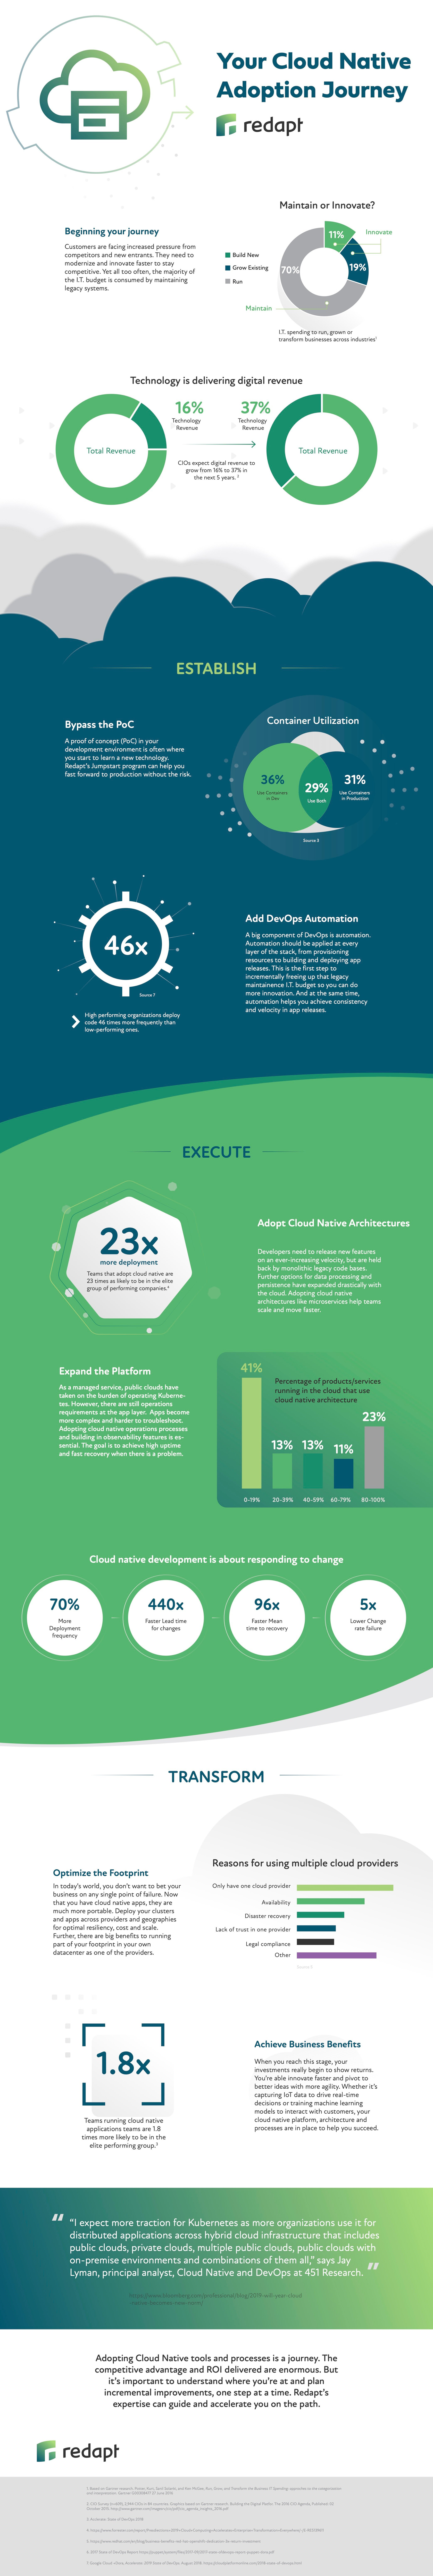 Your Cloud Native Journey - Infographic - Jan 20th 2020 small-1